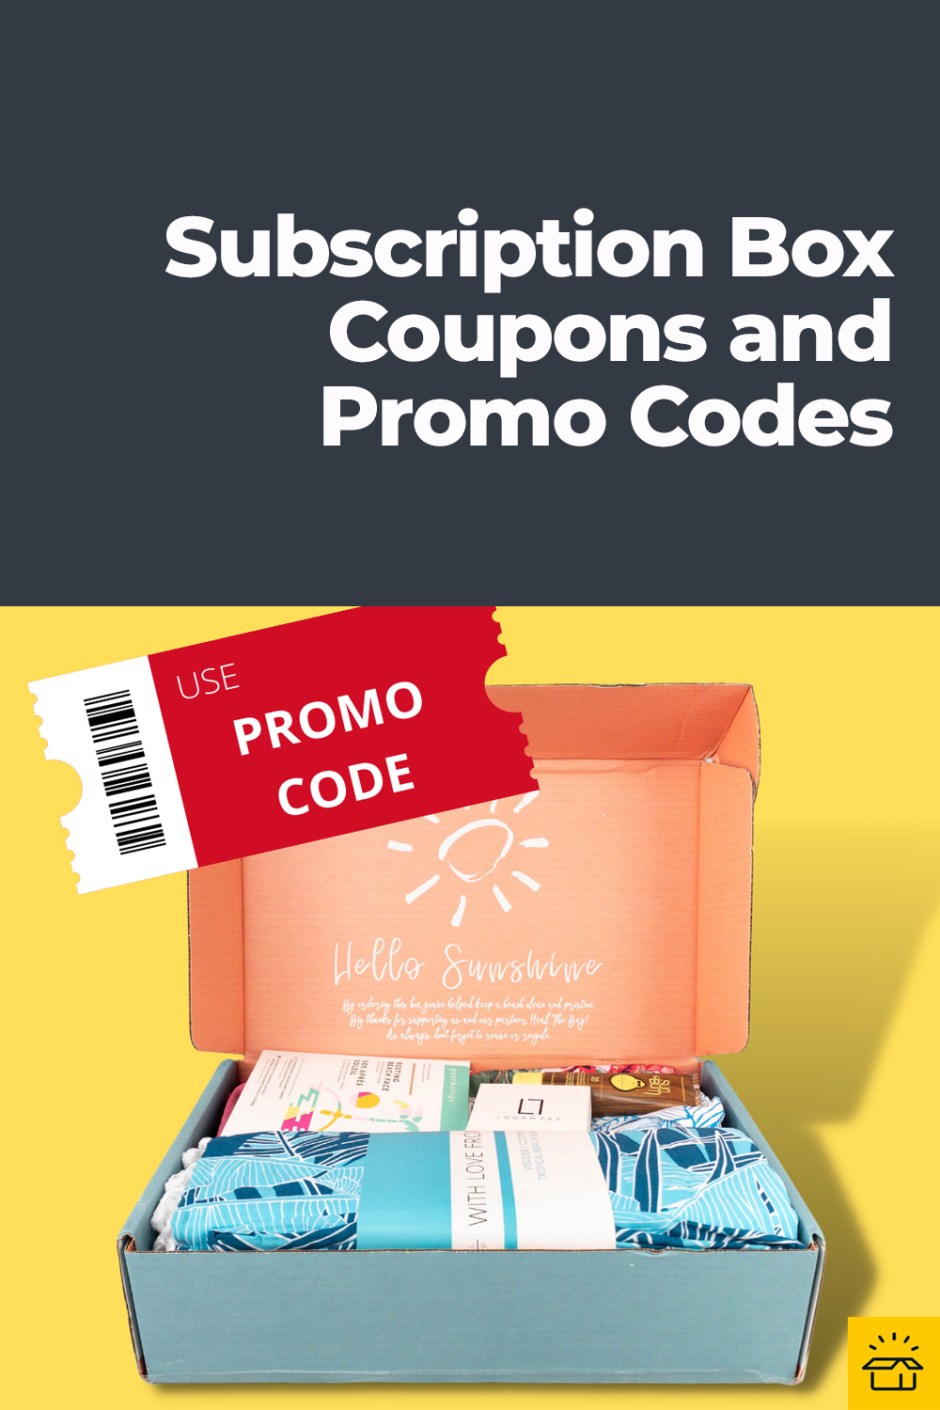 Subscription Box Coupons and Promo Codes Hello Subscription